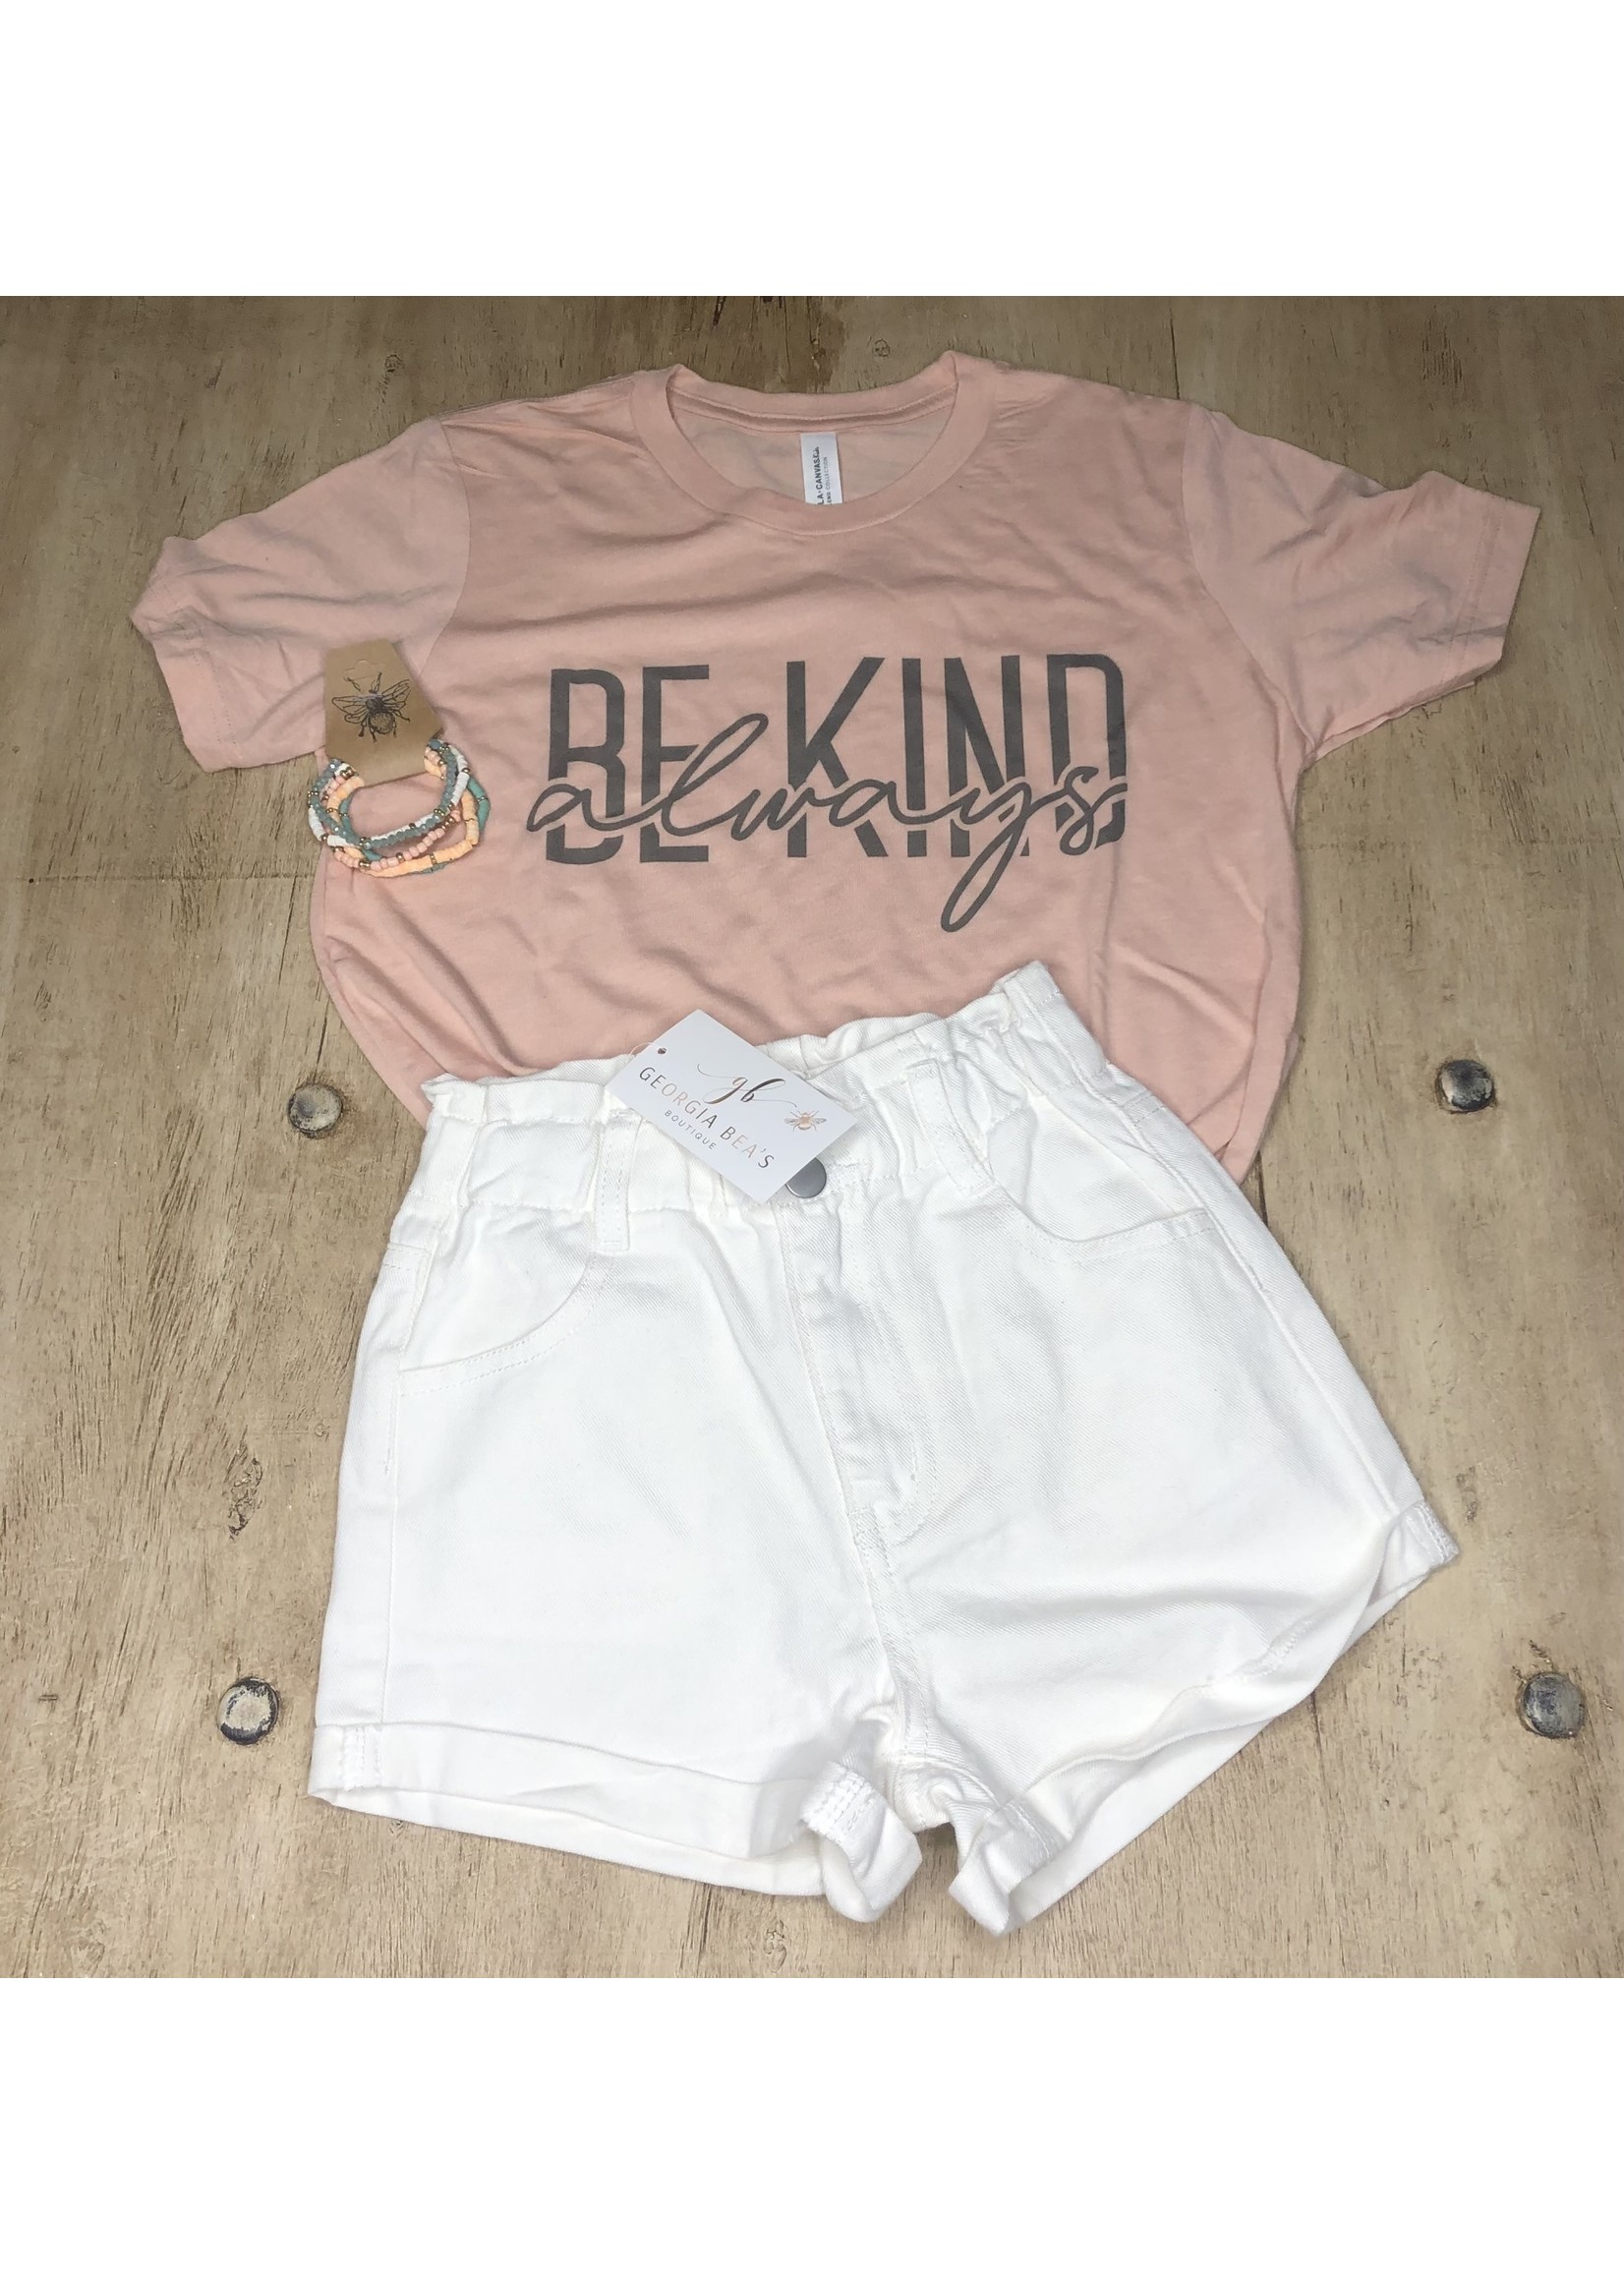 Girls "Be Kind Always" Graphic Tee